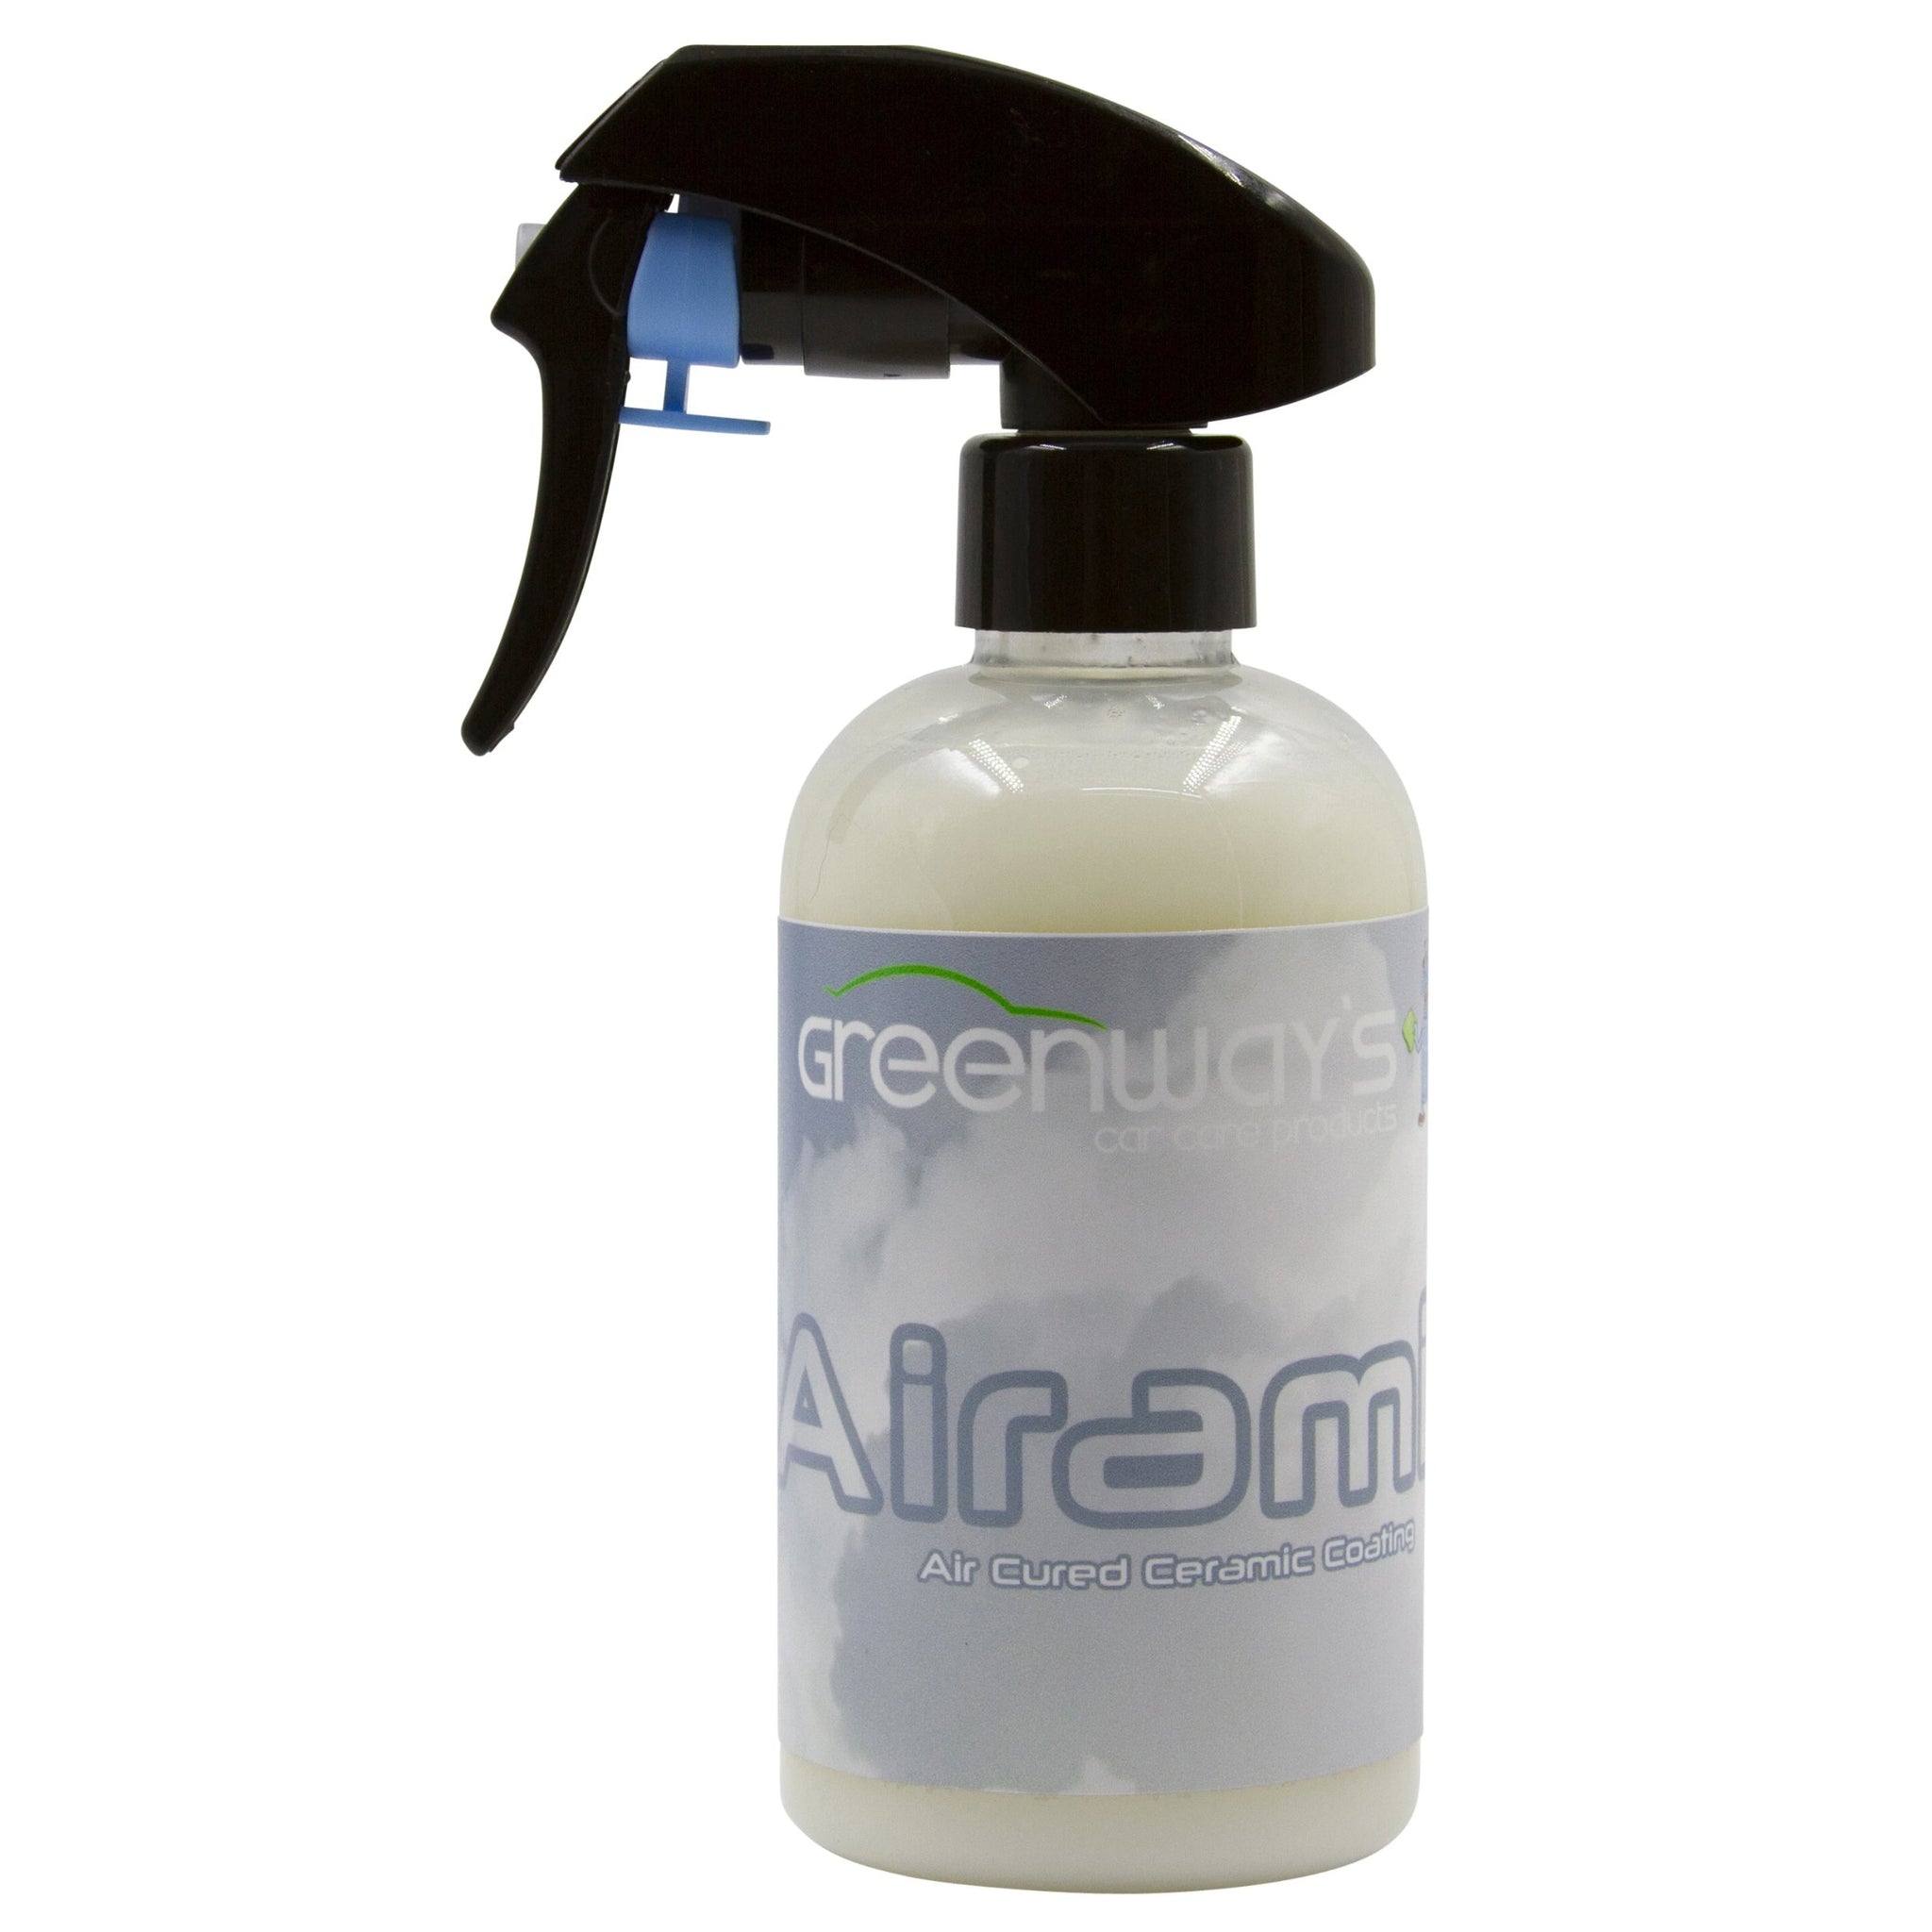 Greenway’s Airamic, air curing ceramic coating spray sealant for paint, glass, plastic, rubber, 2 year duration, 8 ounces.